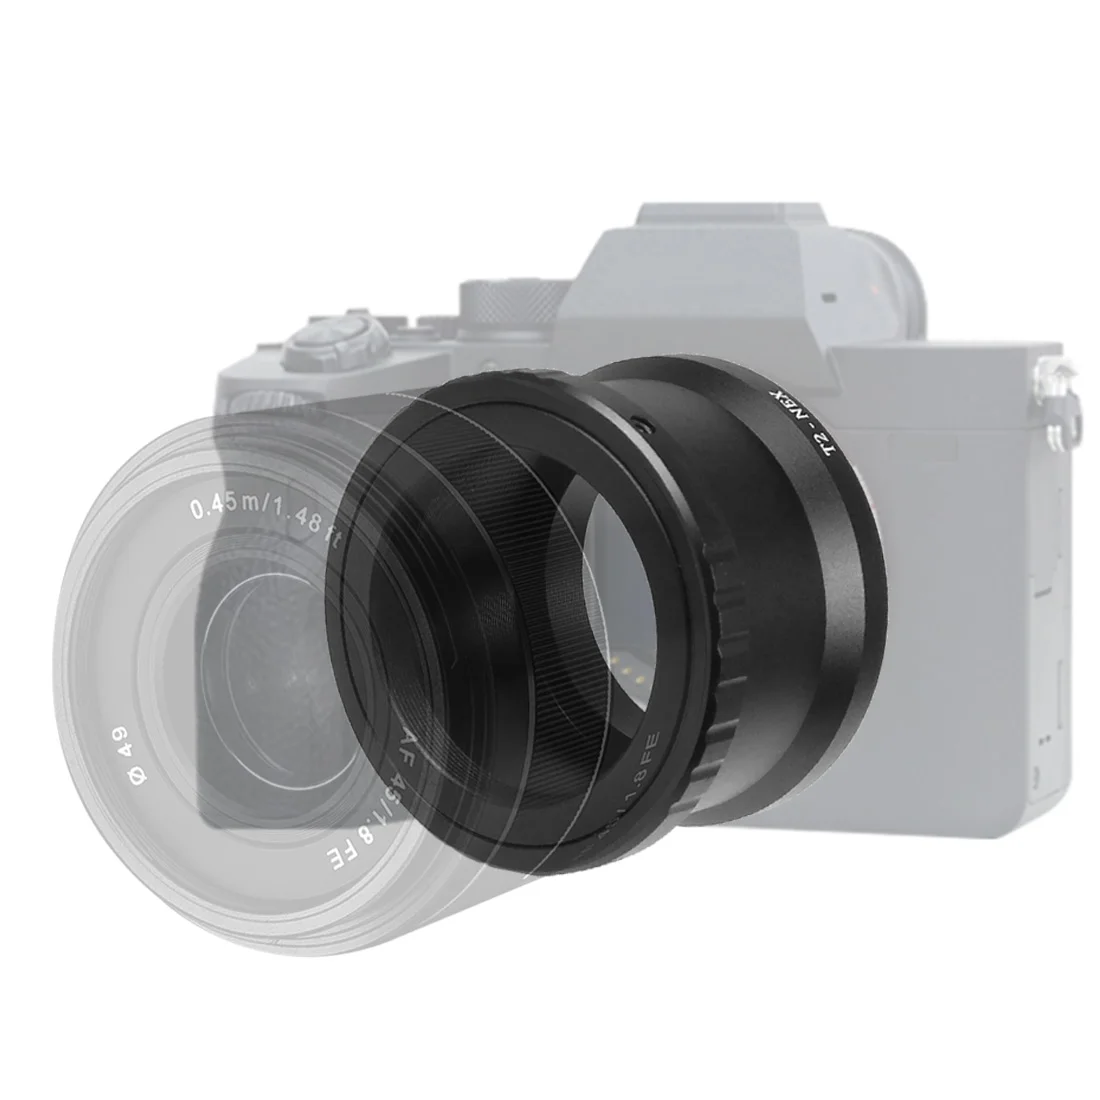 

T2-NEX Telephoto Telescope Mirror Lens Adapter Ring for Sony NEX E-Mount DSLR Cameras to T2/T Mount Lens Accessories